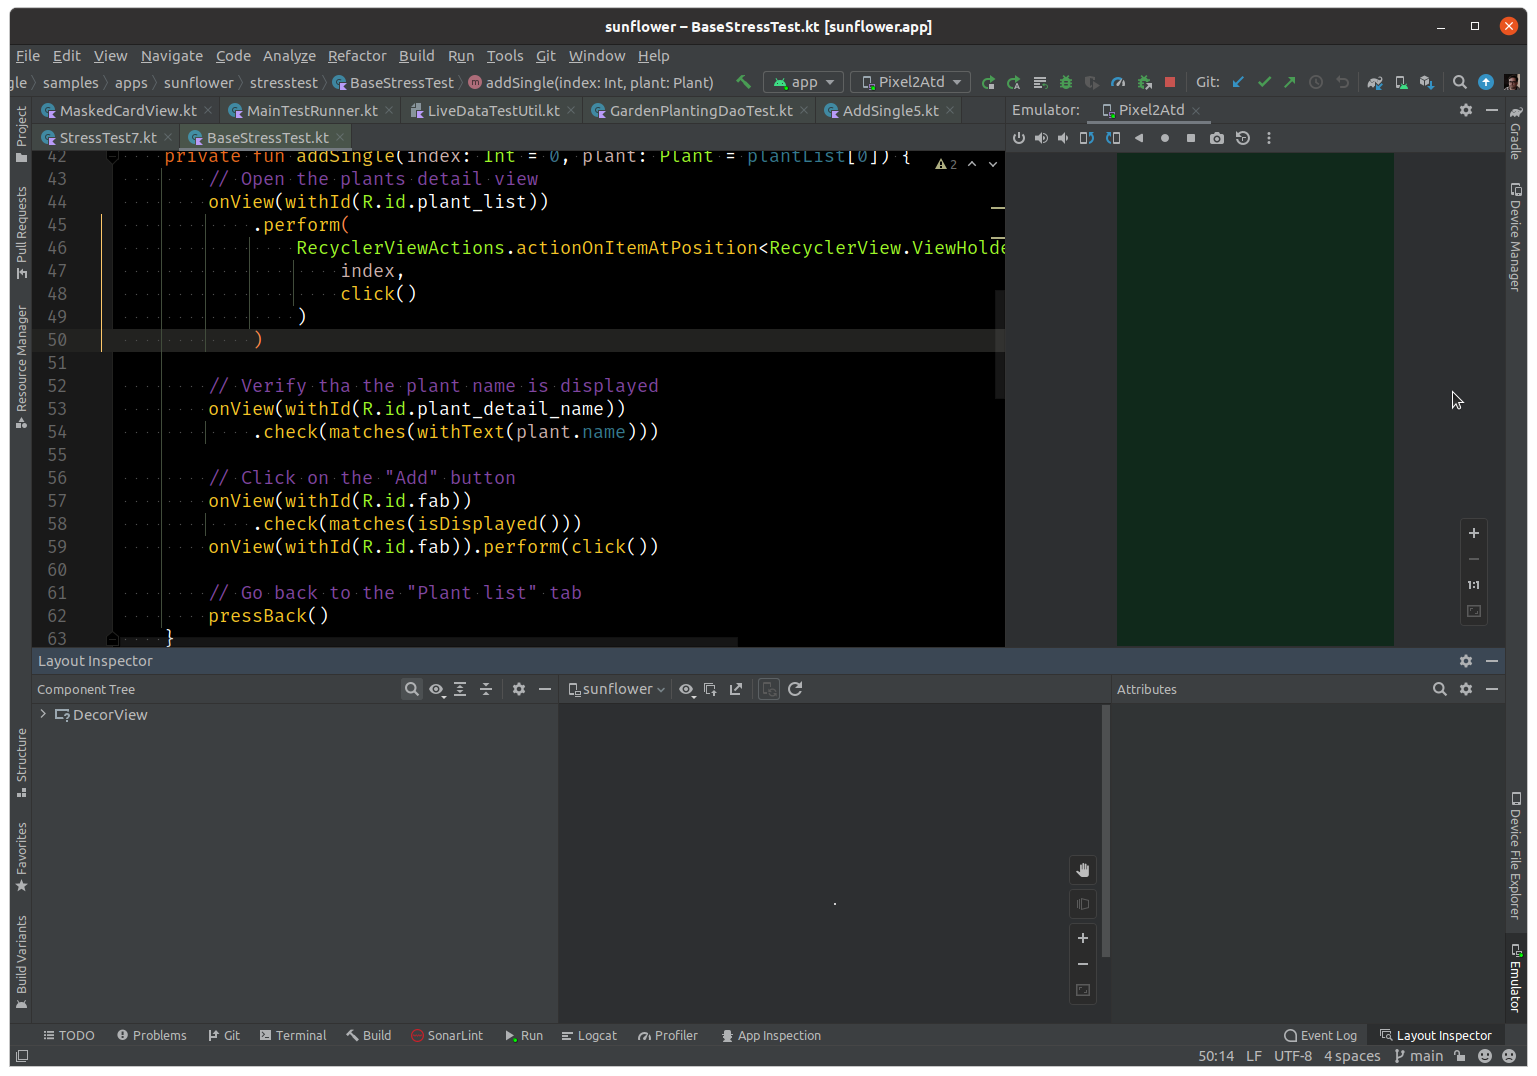 Android studio screenshot with ATD emulator on the right side and layout inspector open on the bottom